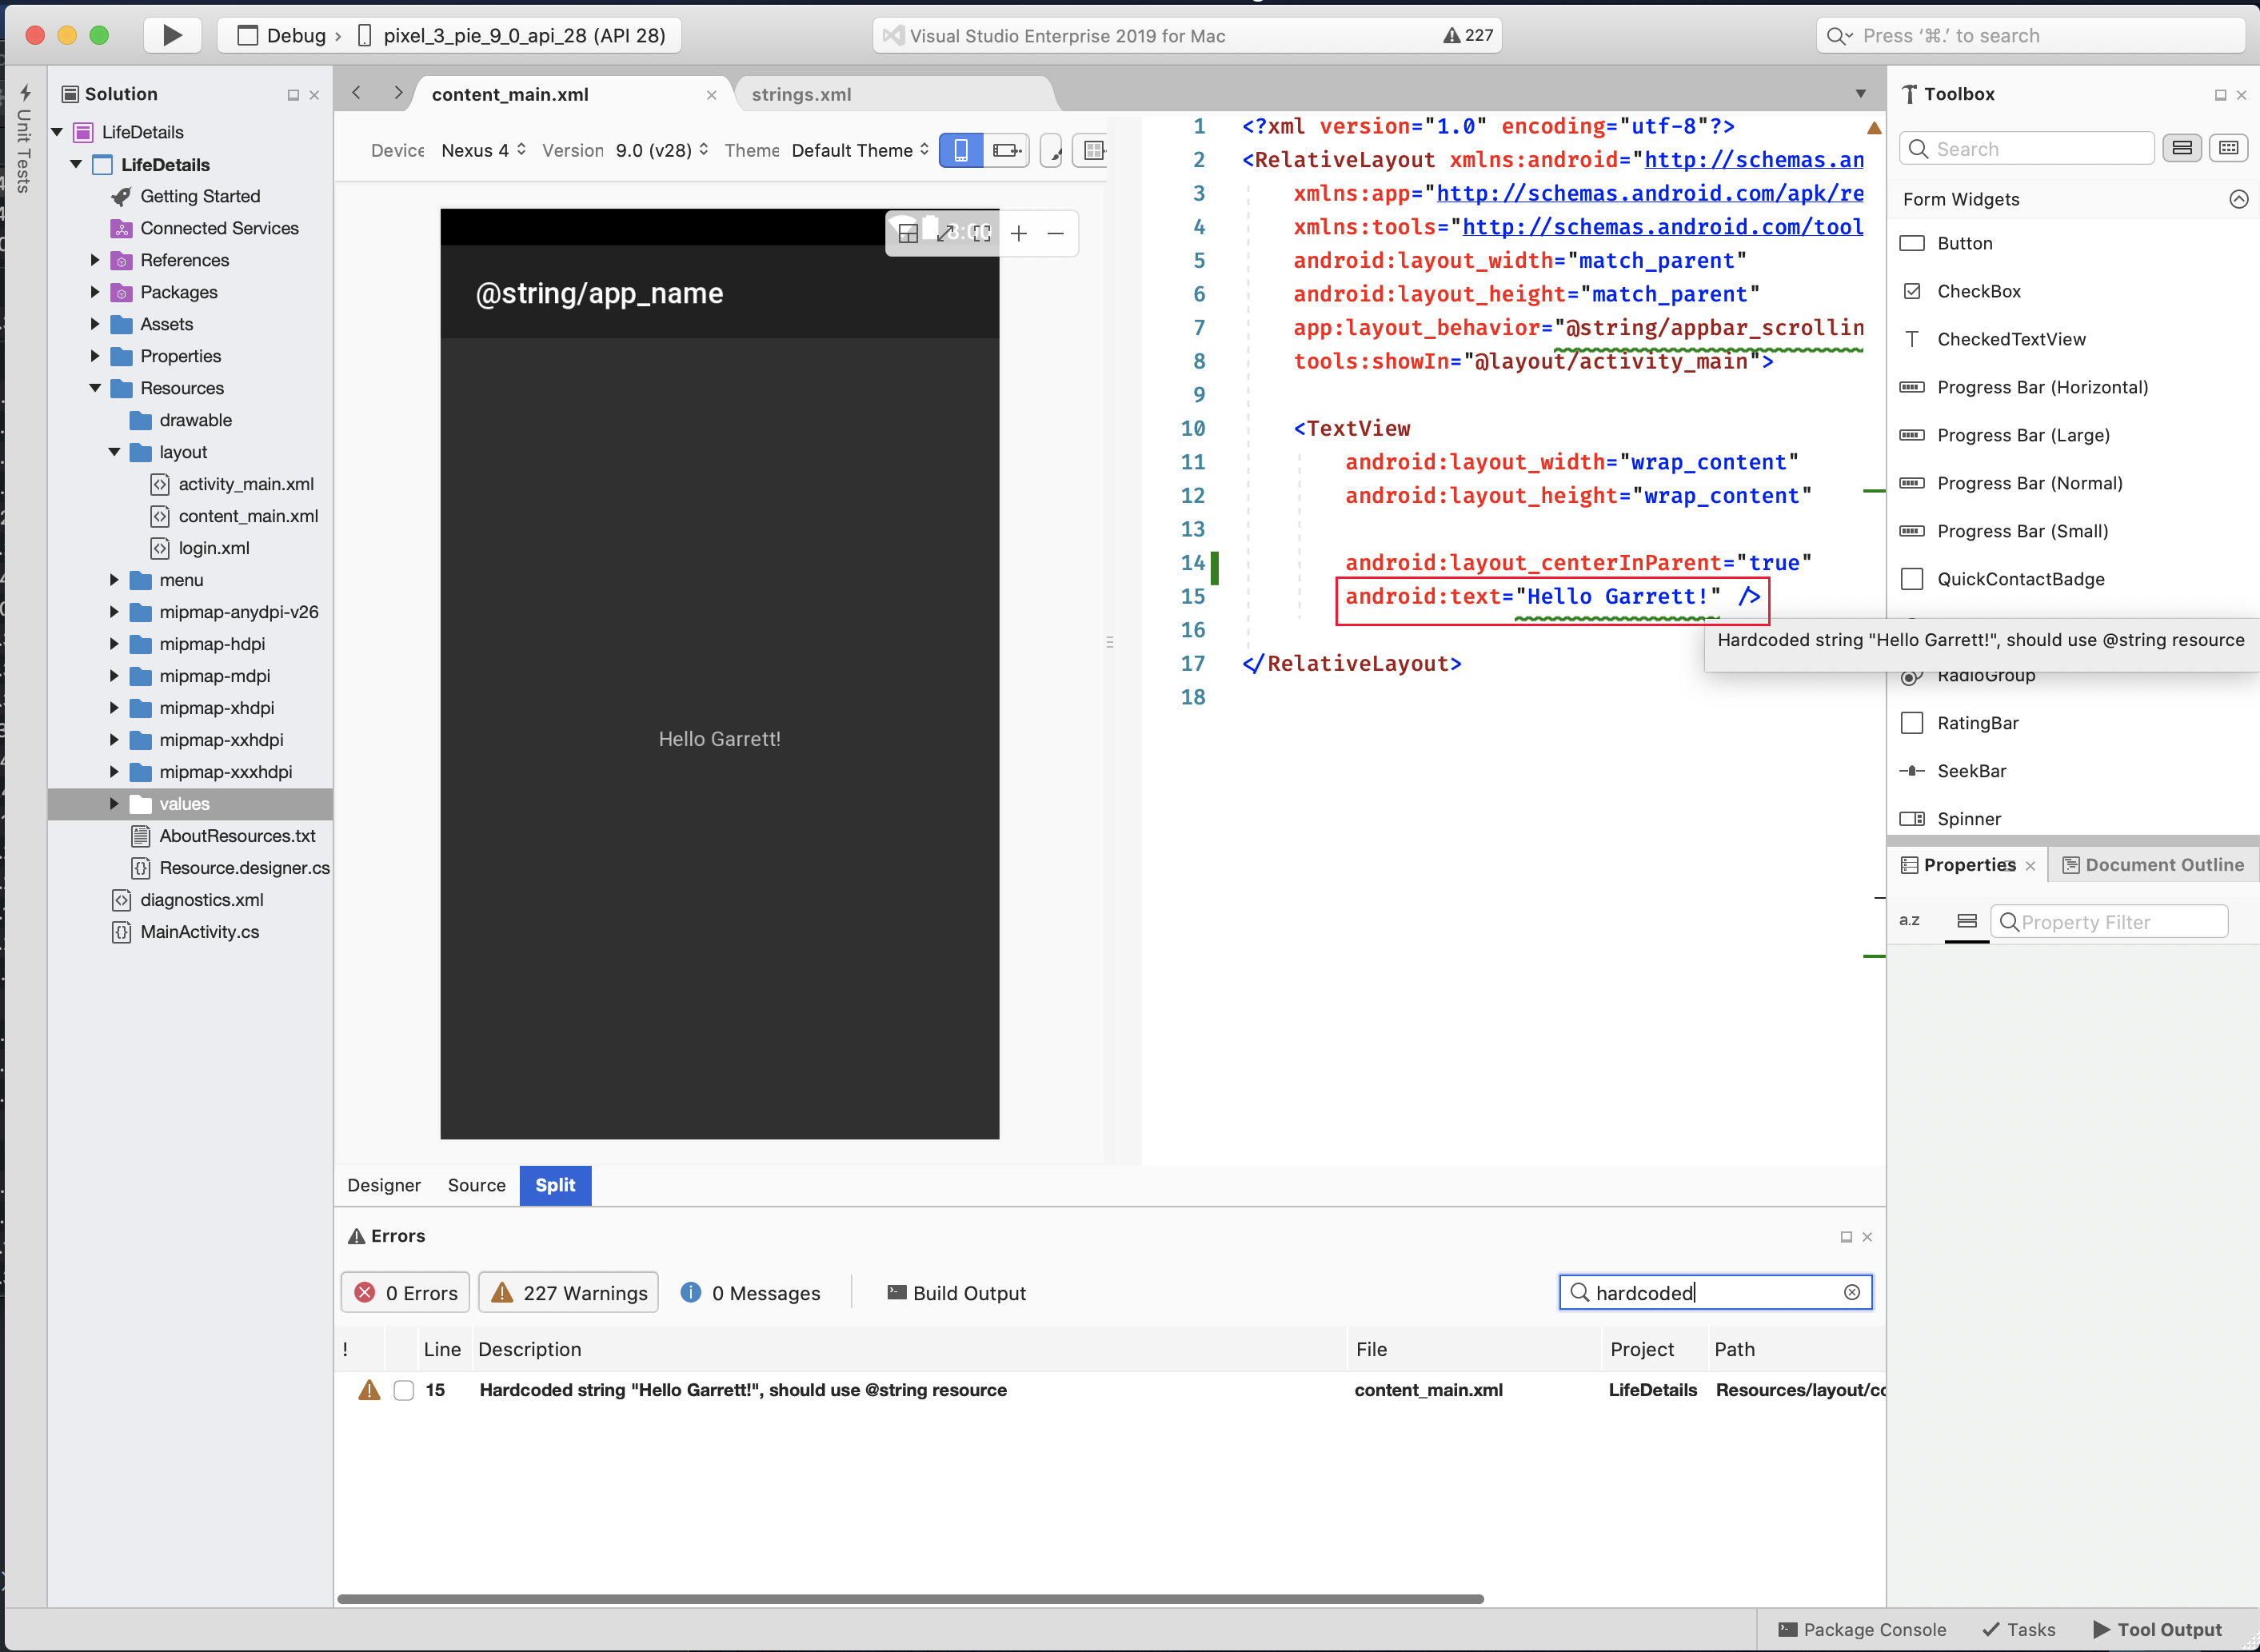 Android diagnostics enabled on Visual Studio for Mac